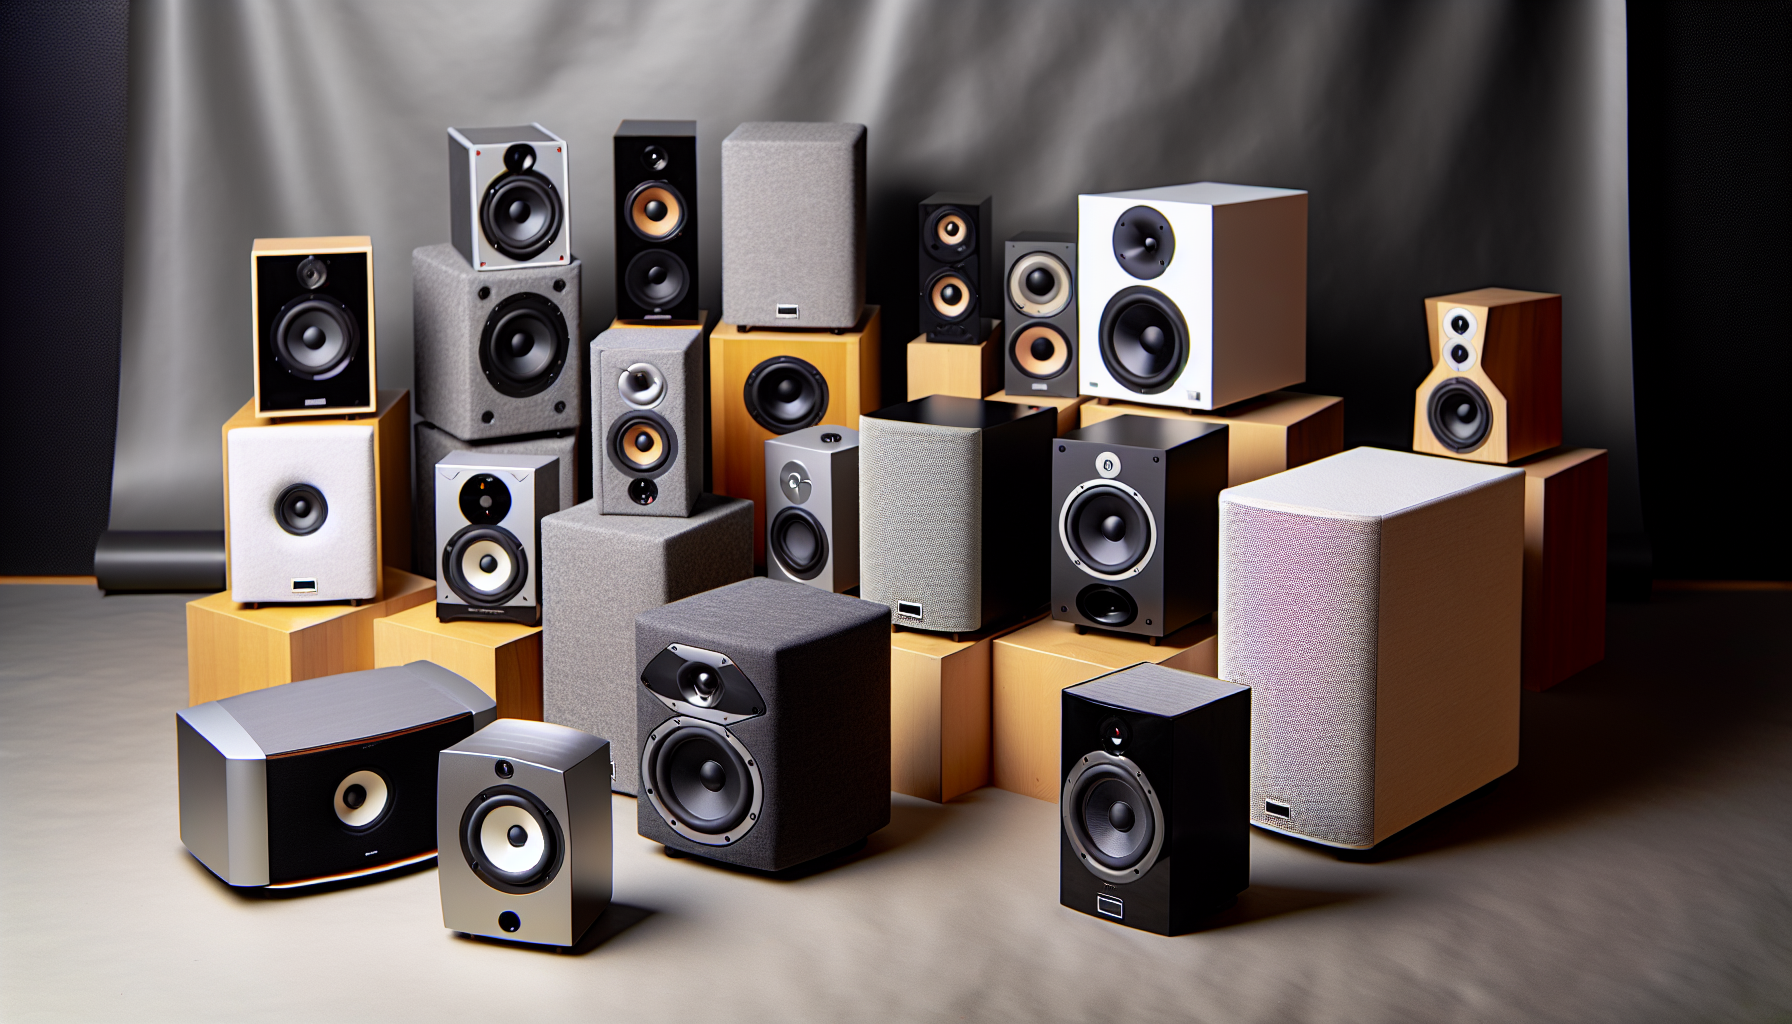 A variety of center channel speakers on display